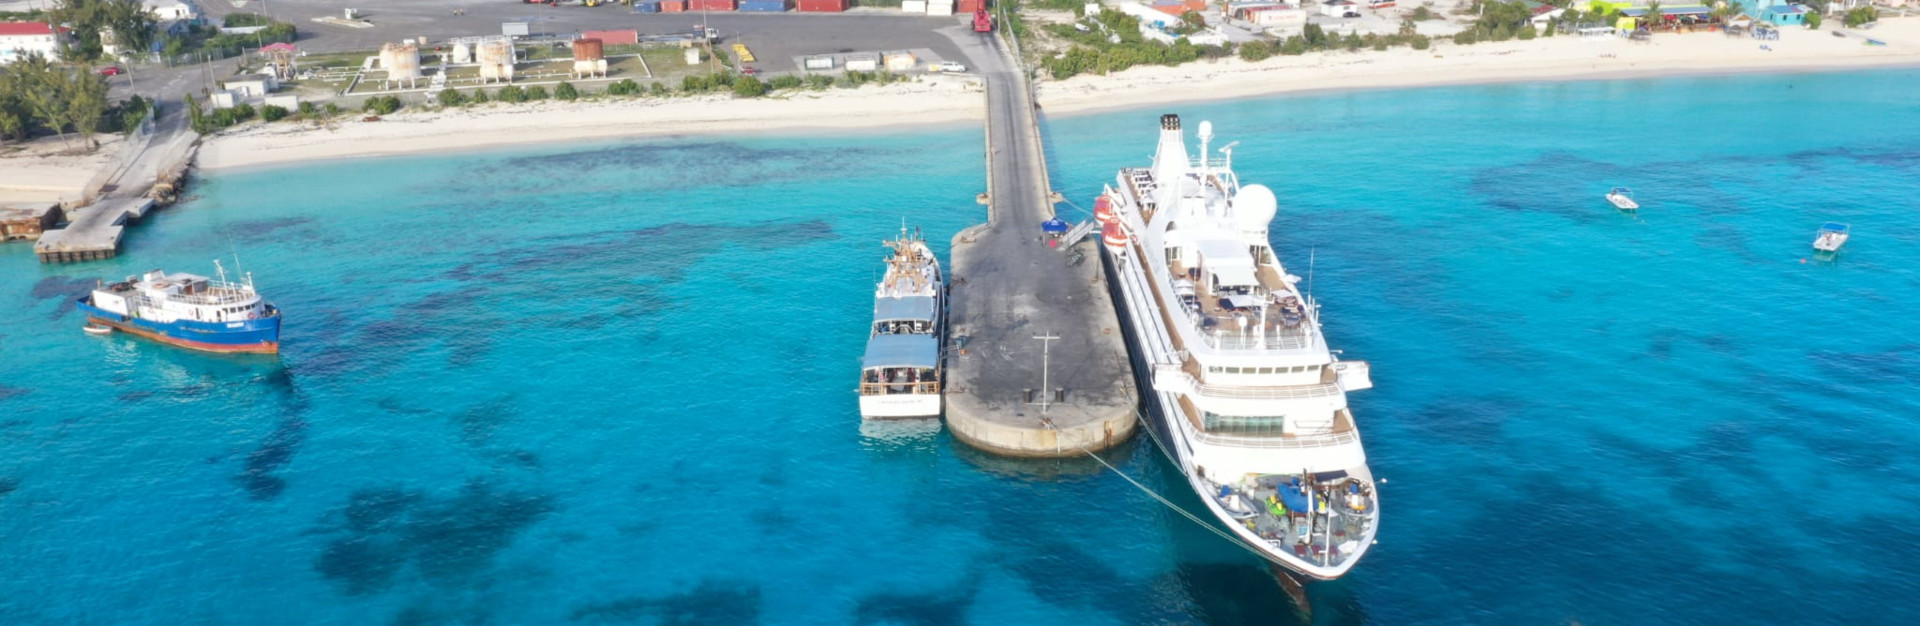 Turks And Caicos Islands Ports Authority Grand Turk In The Caribbean